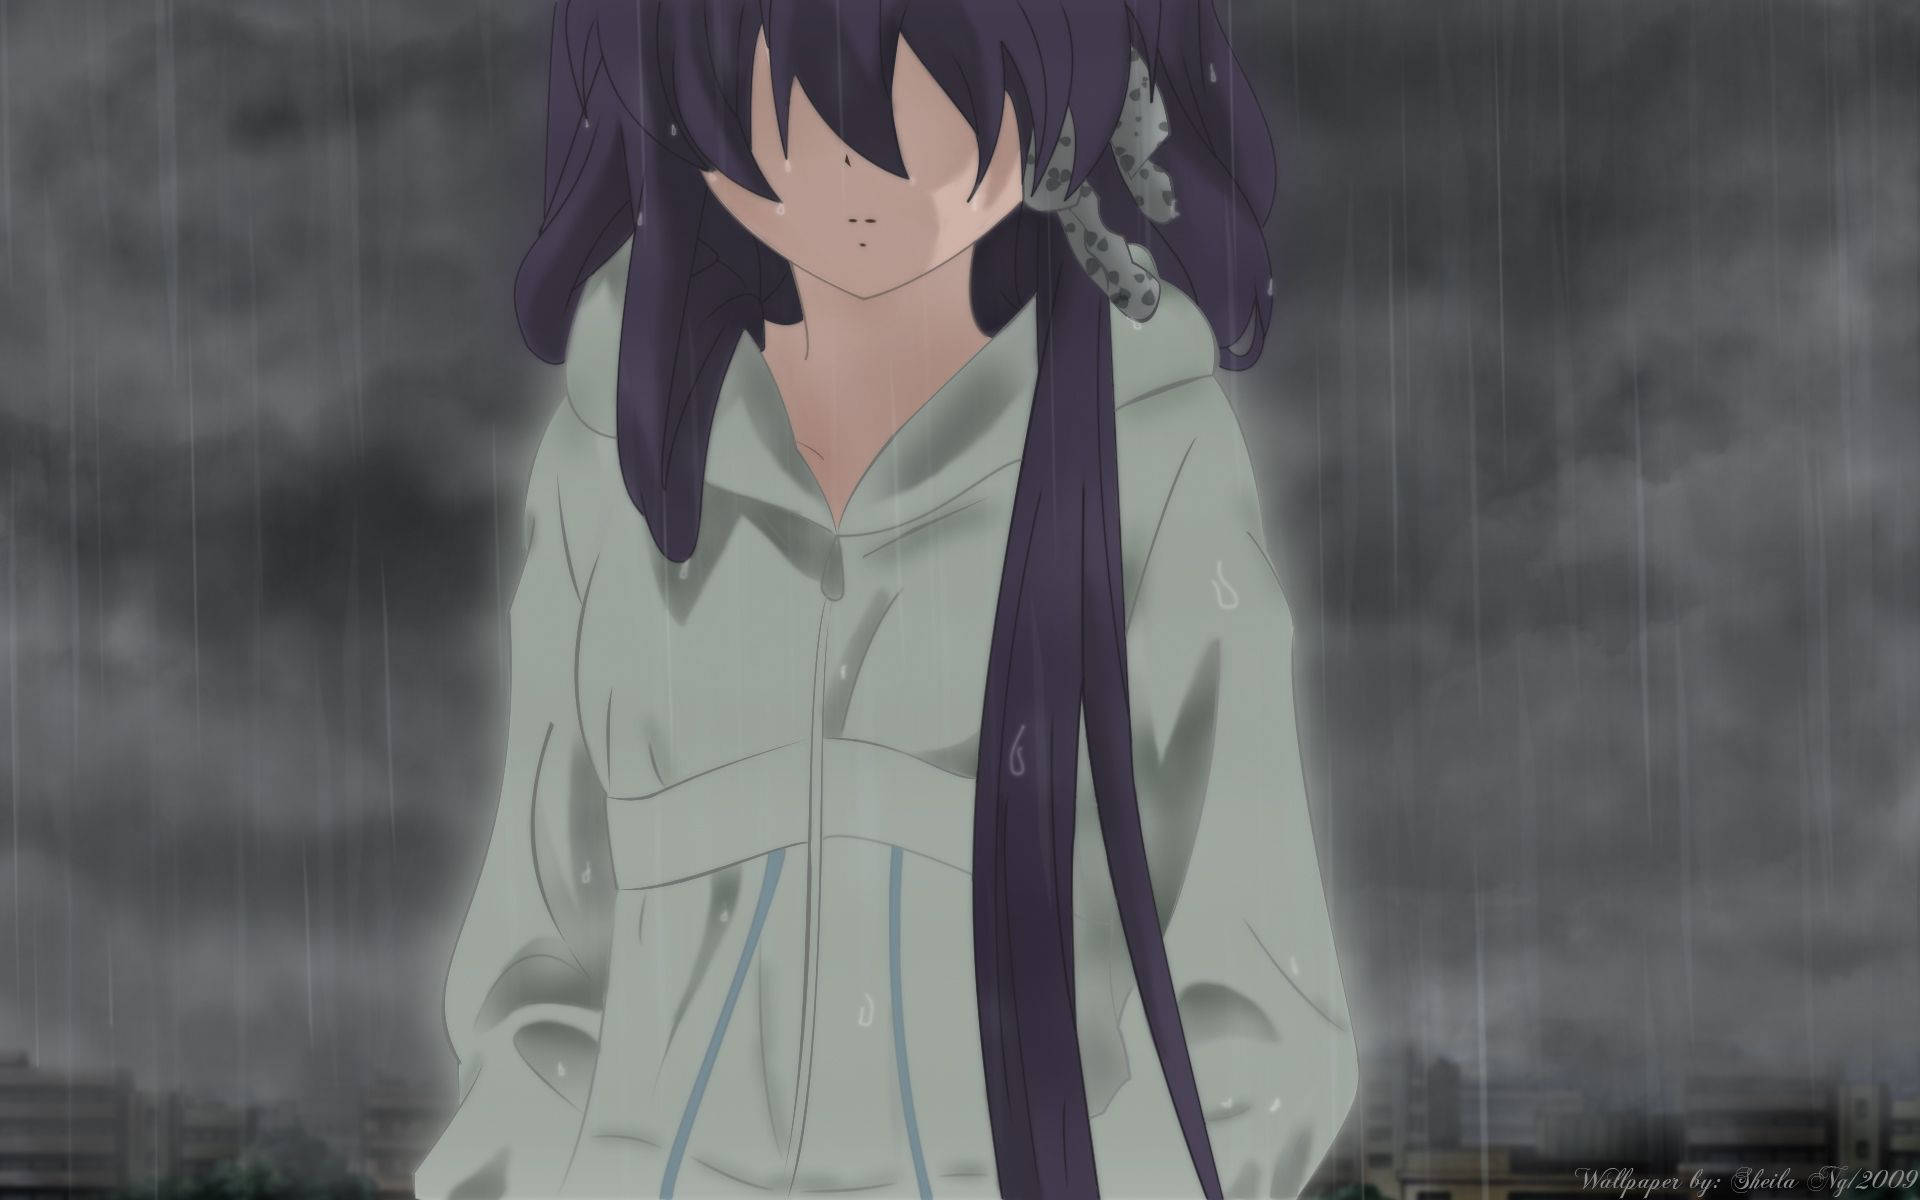 An Anime Girl Overwhelmed By Sadness Background